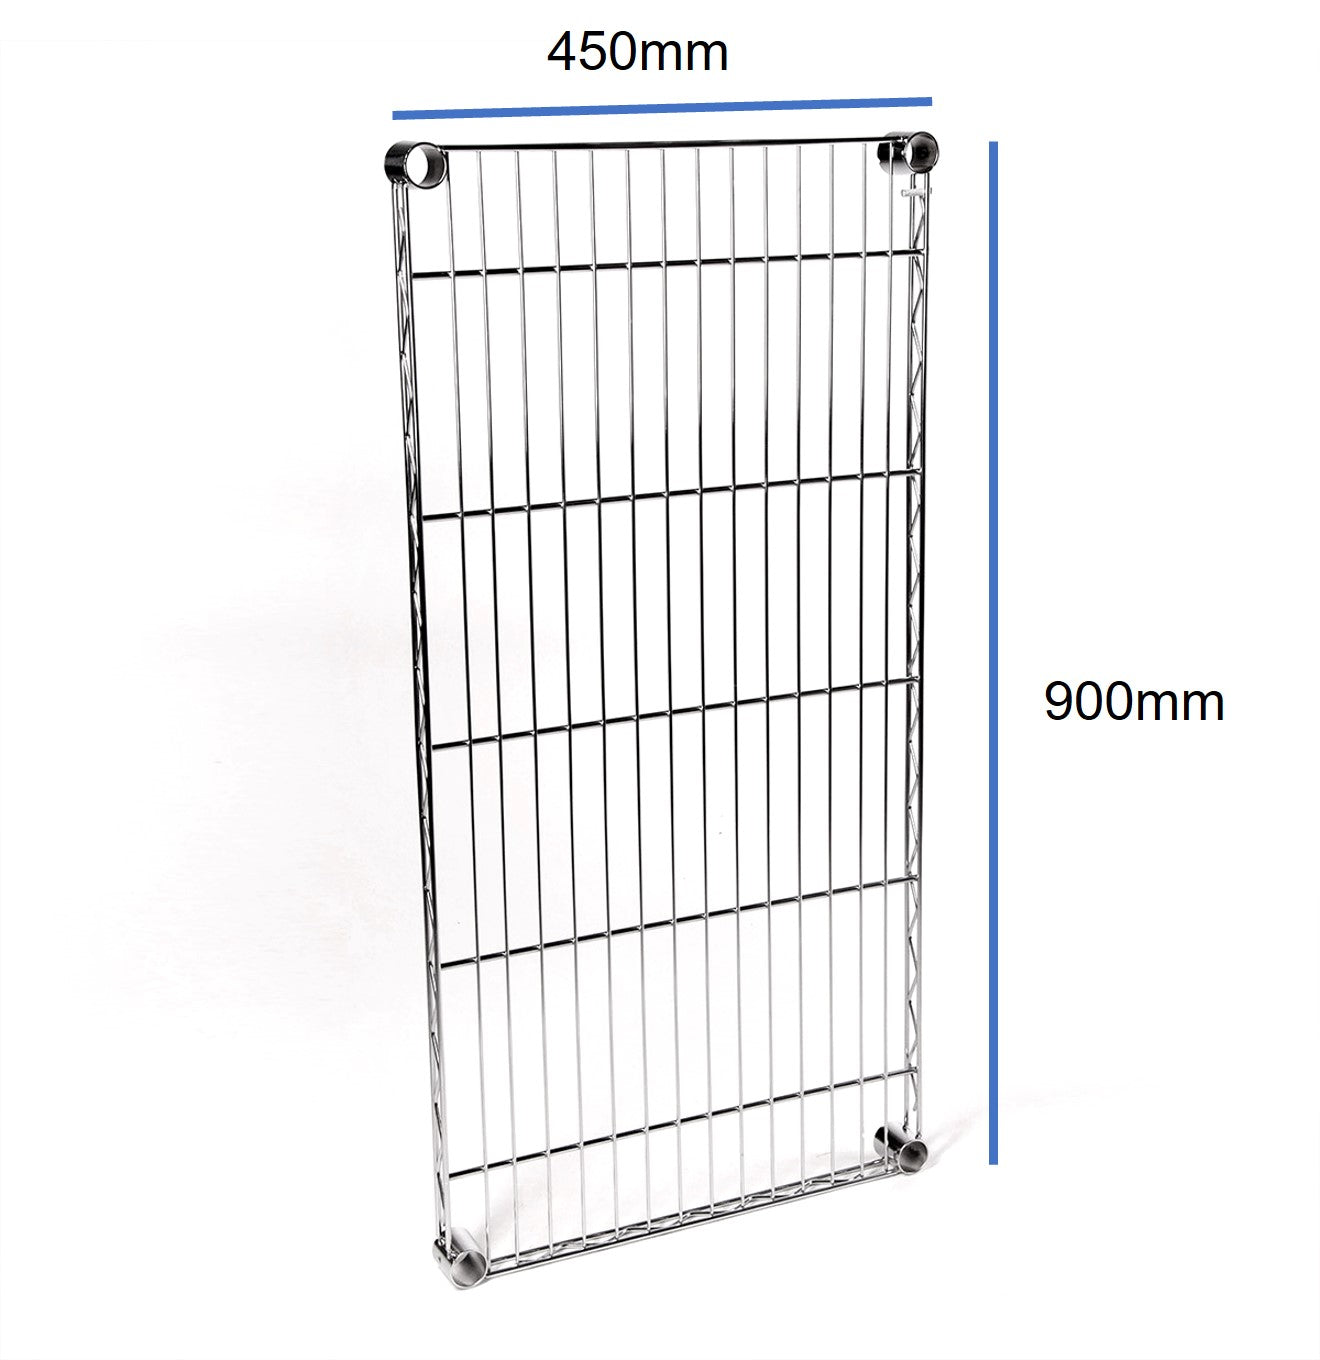 Sets with 900mm x 450mm Shelves